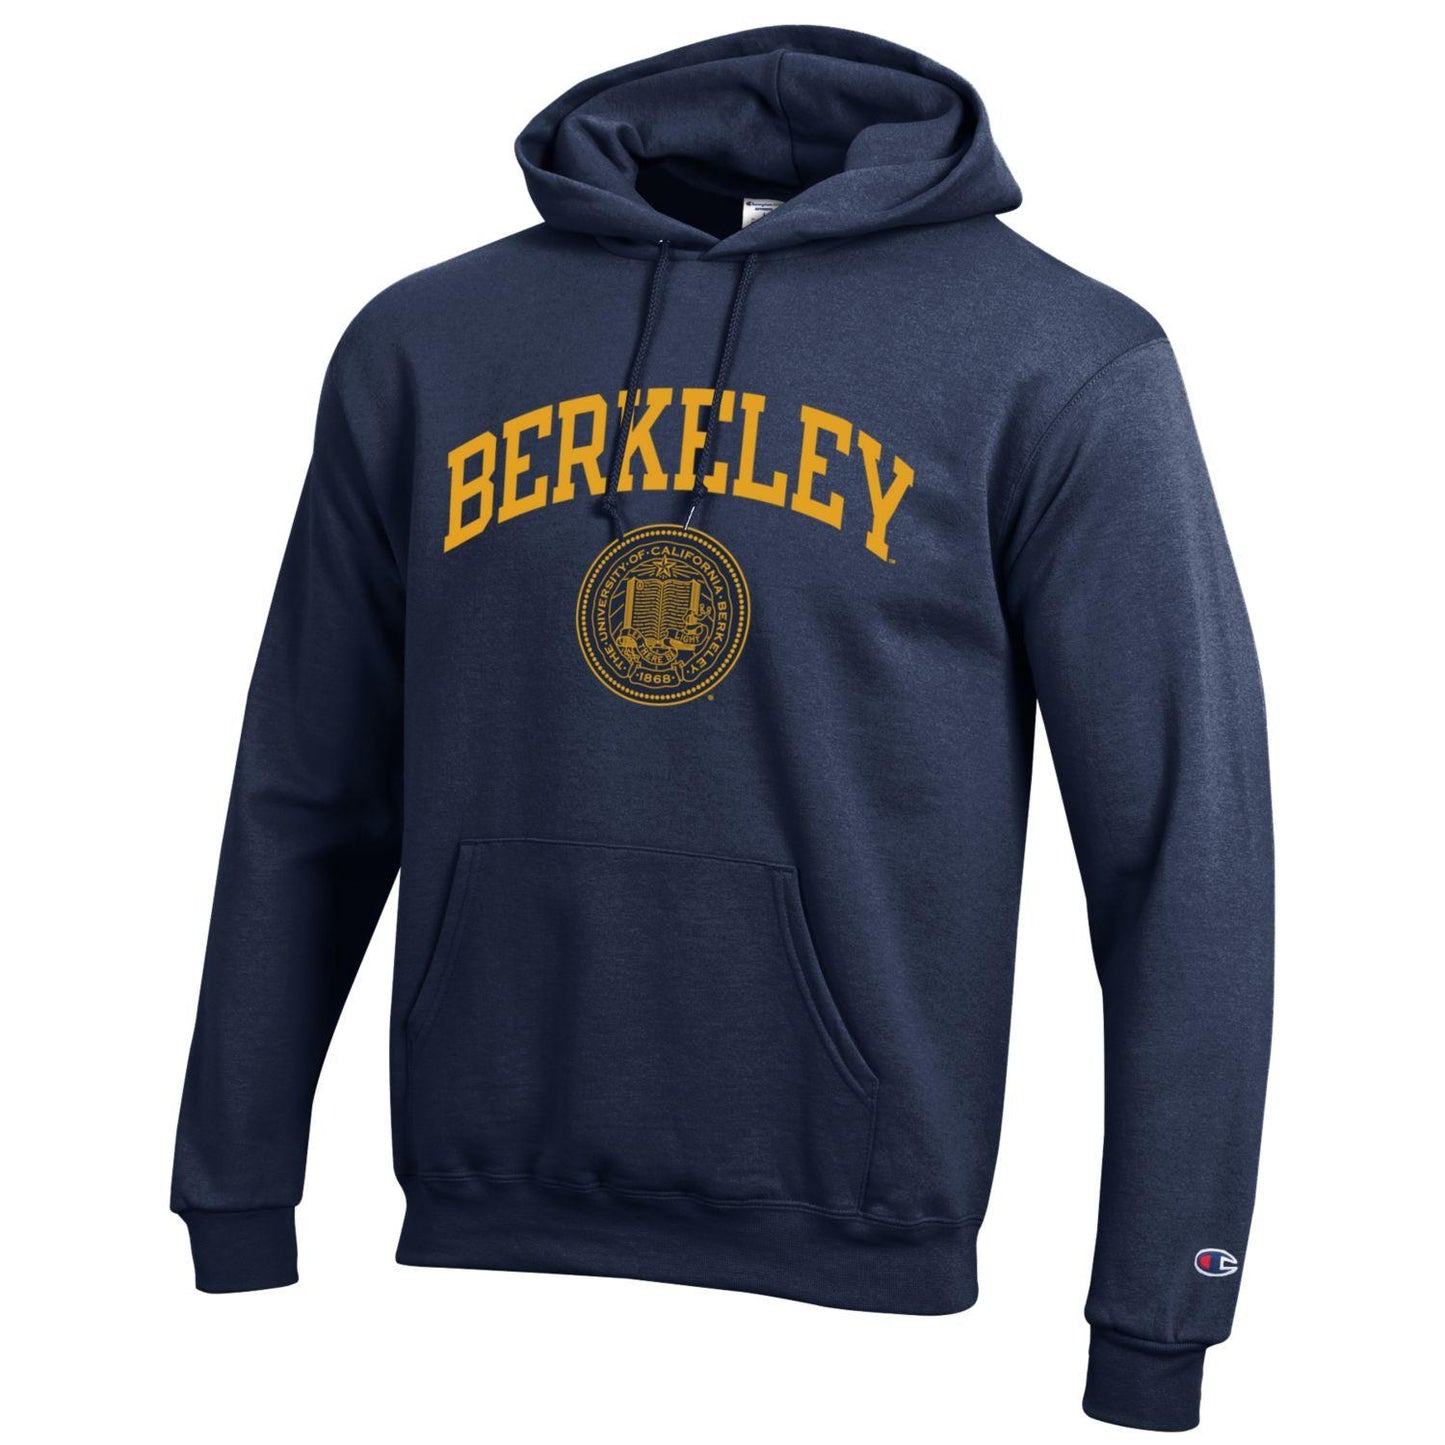 University of College Champion California Sweats seal and – Shop Berkeley hoodie Wear arch